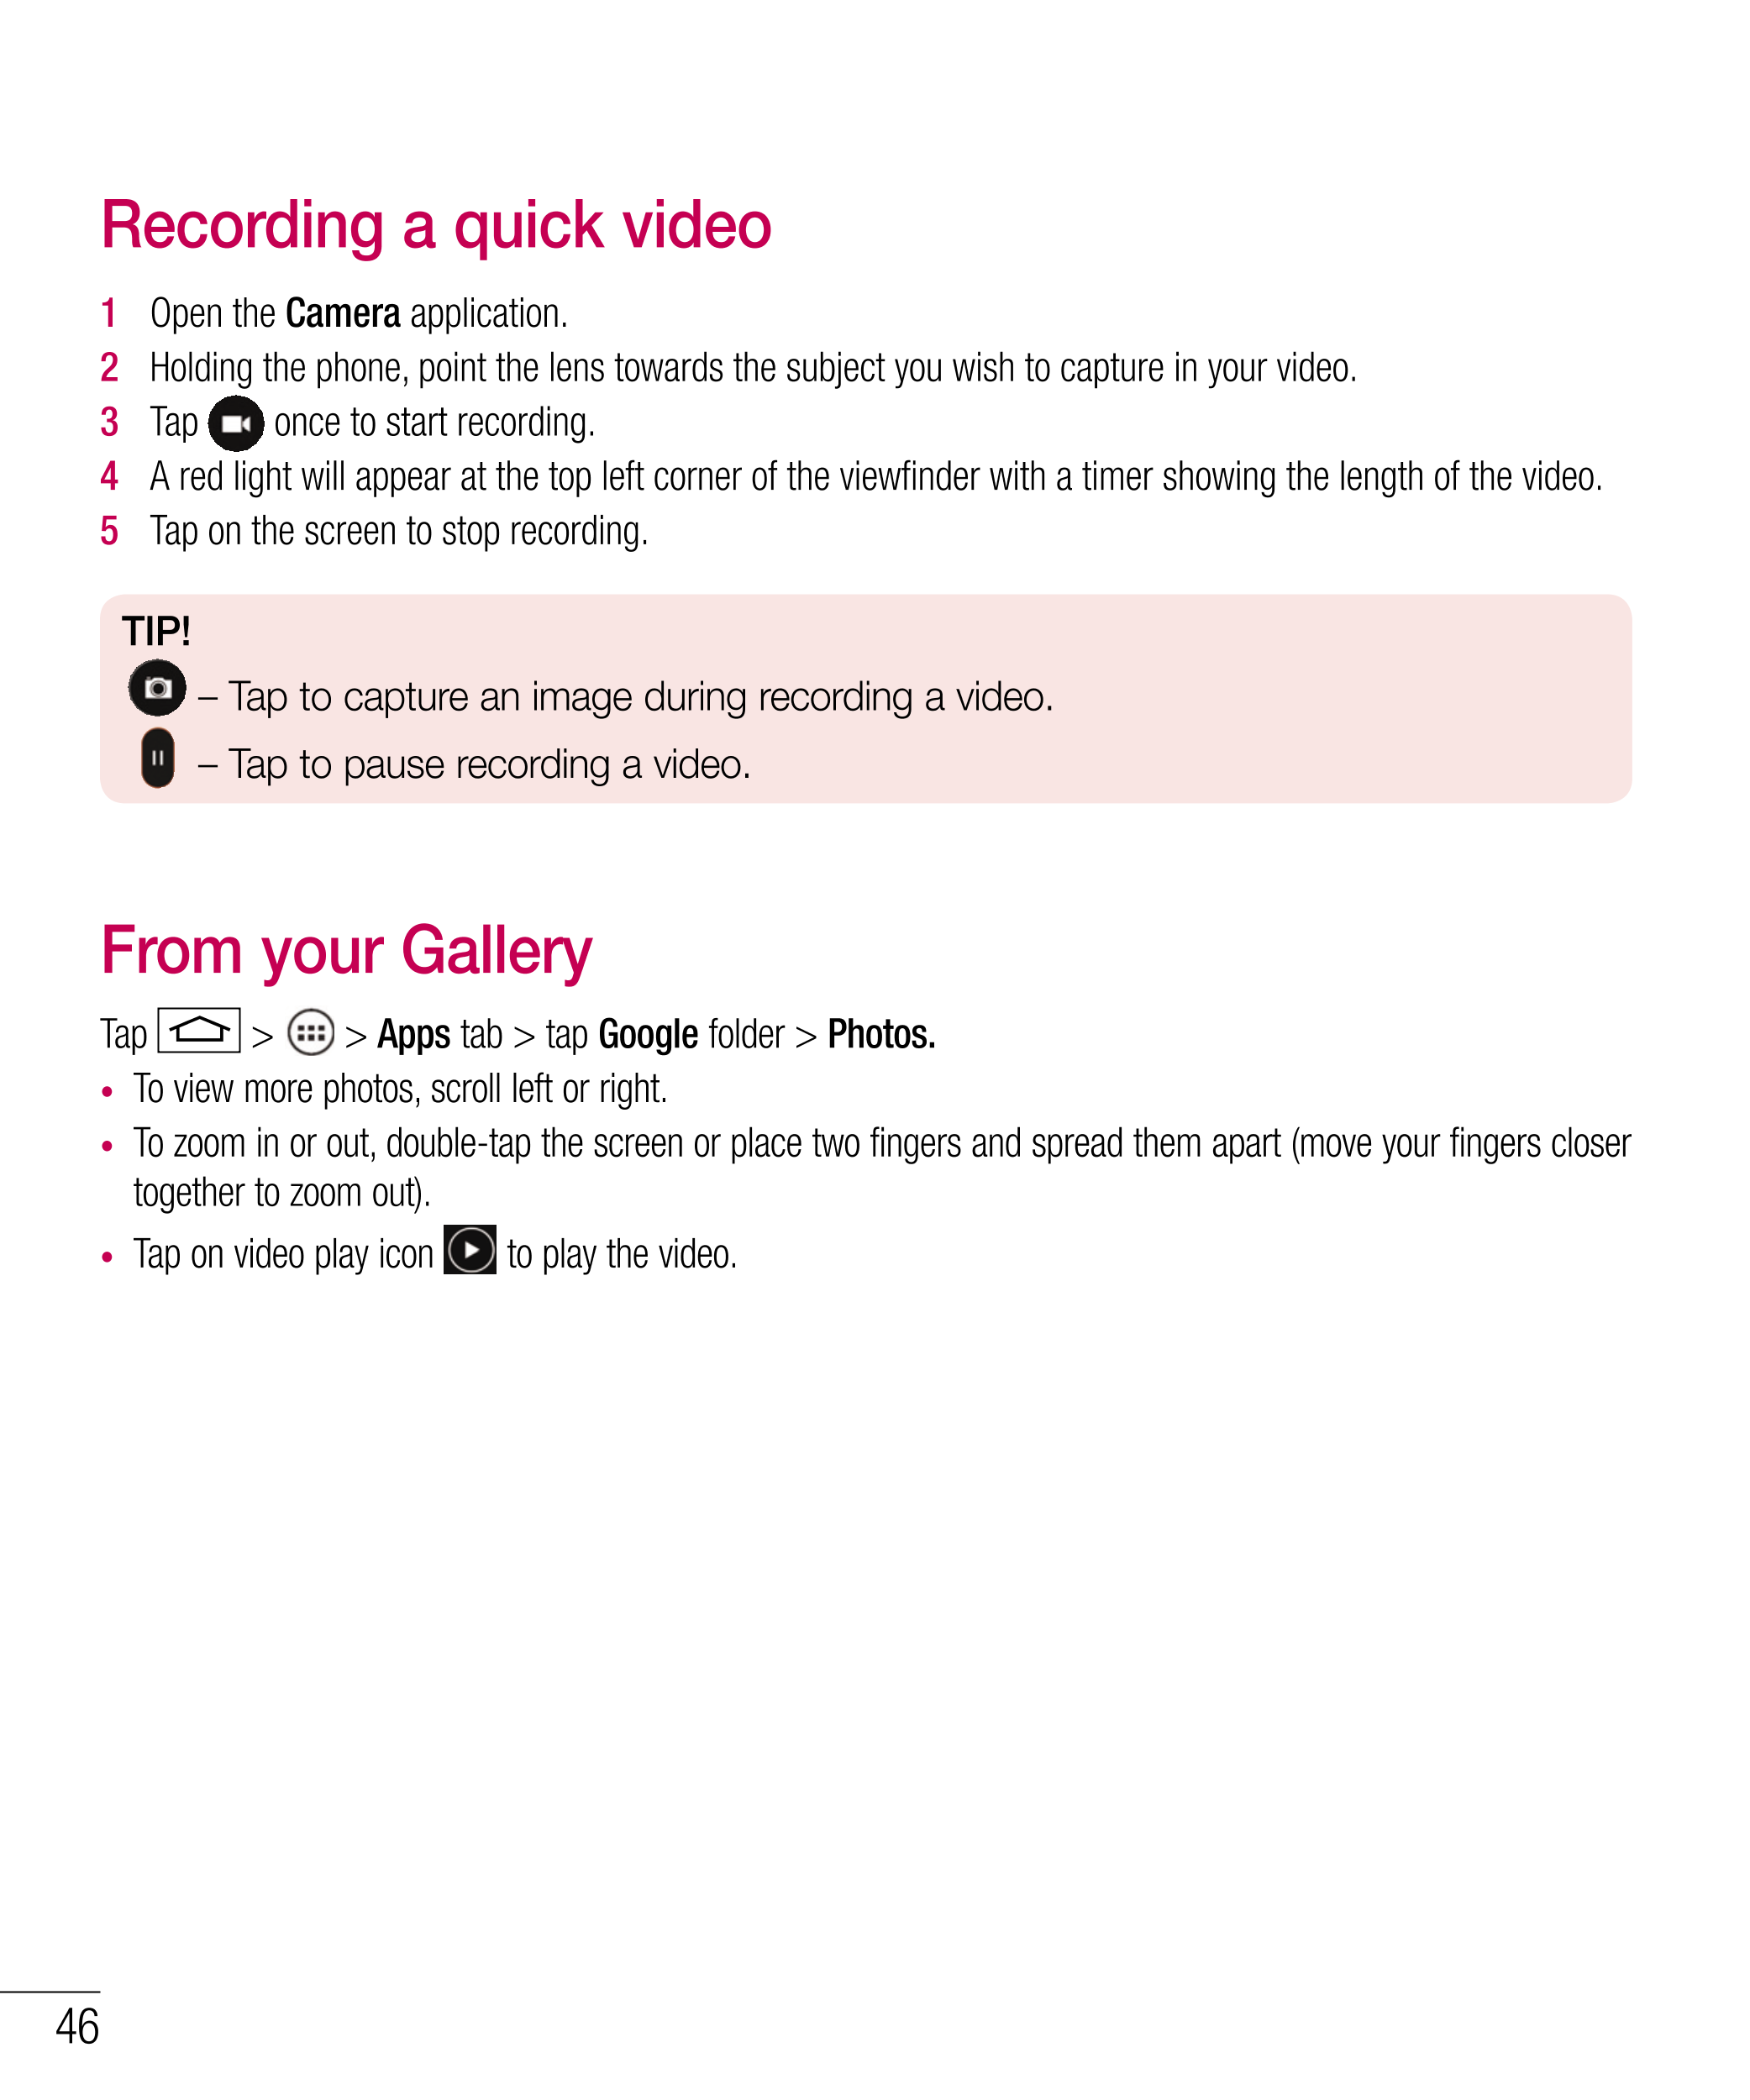 Recording a quick video
1   Open the  Camera application. 
2   Holding the phone, point the lens towards the subject you wish to